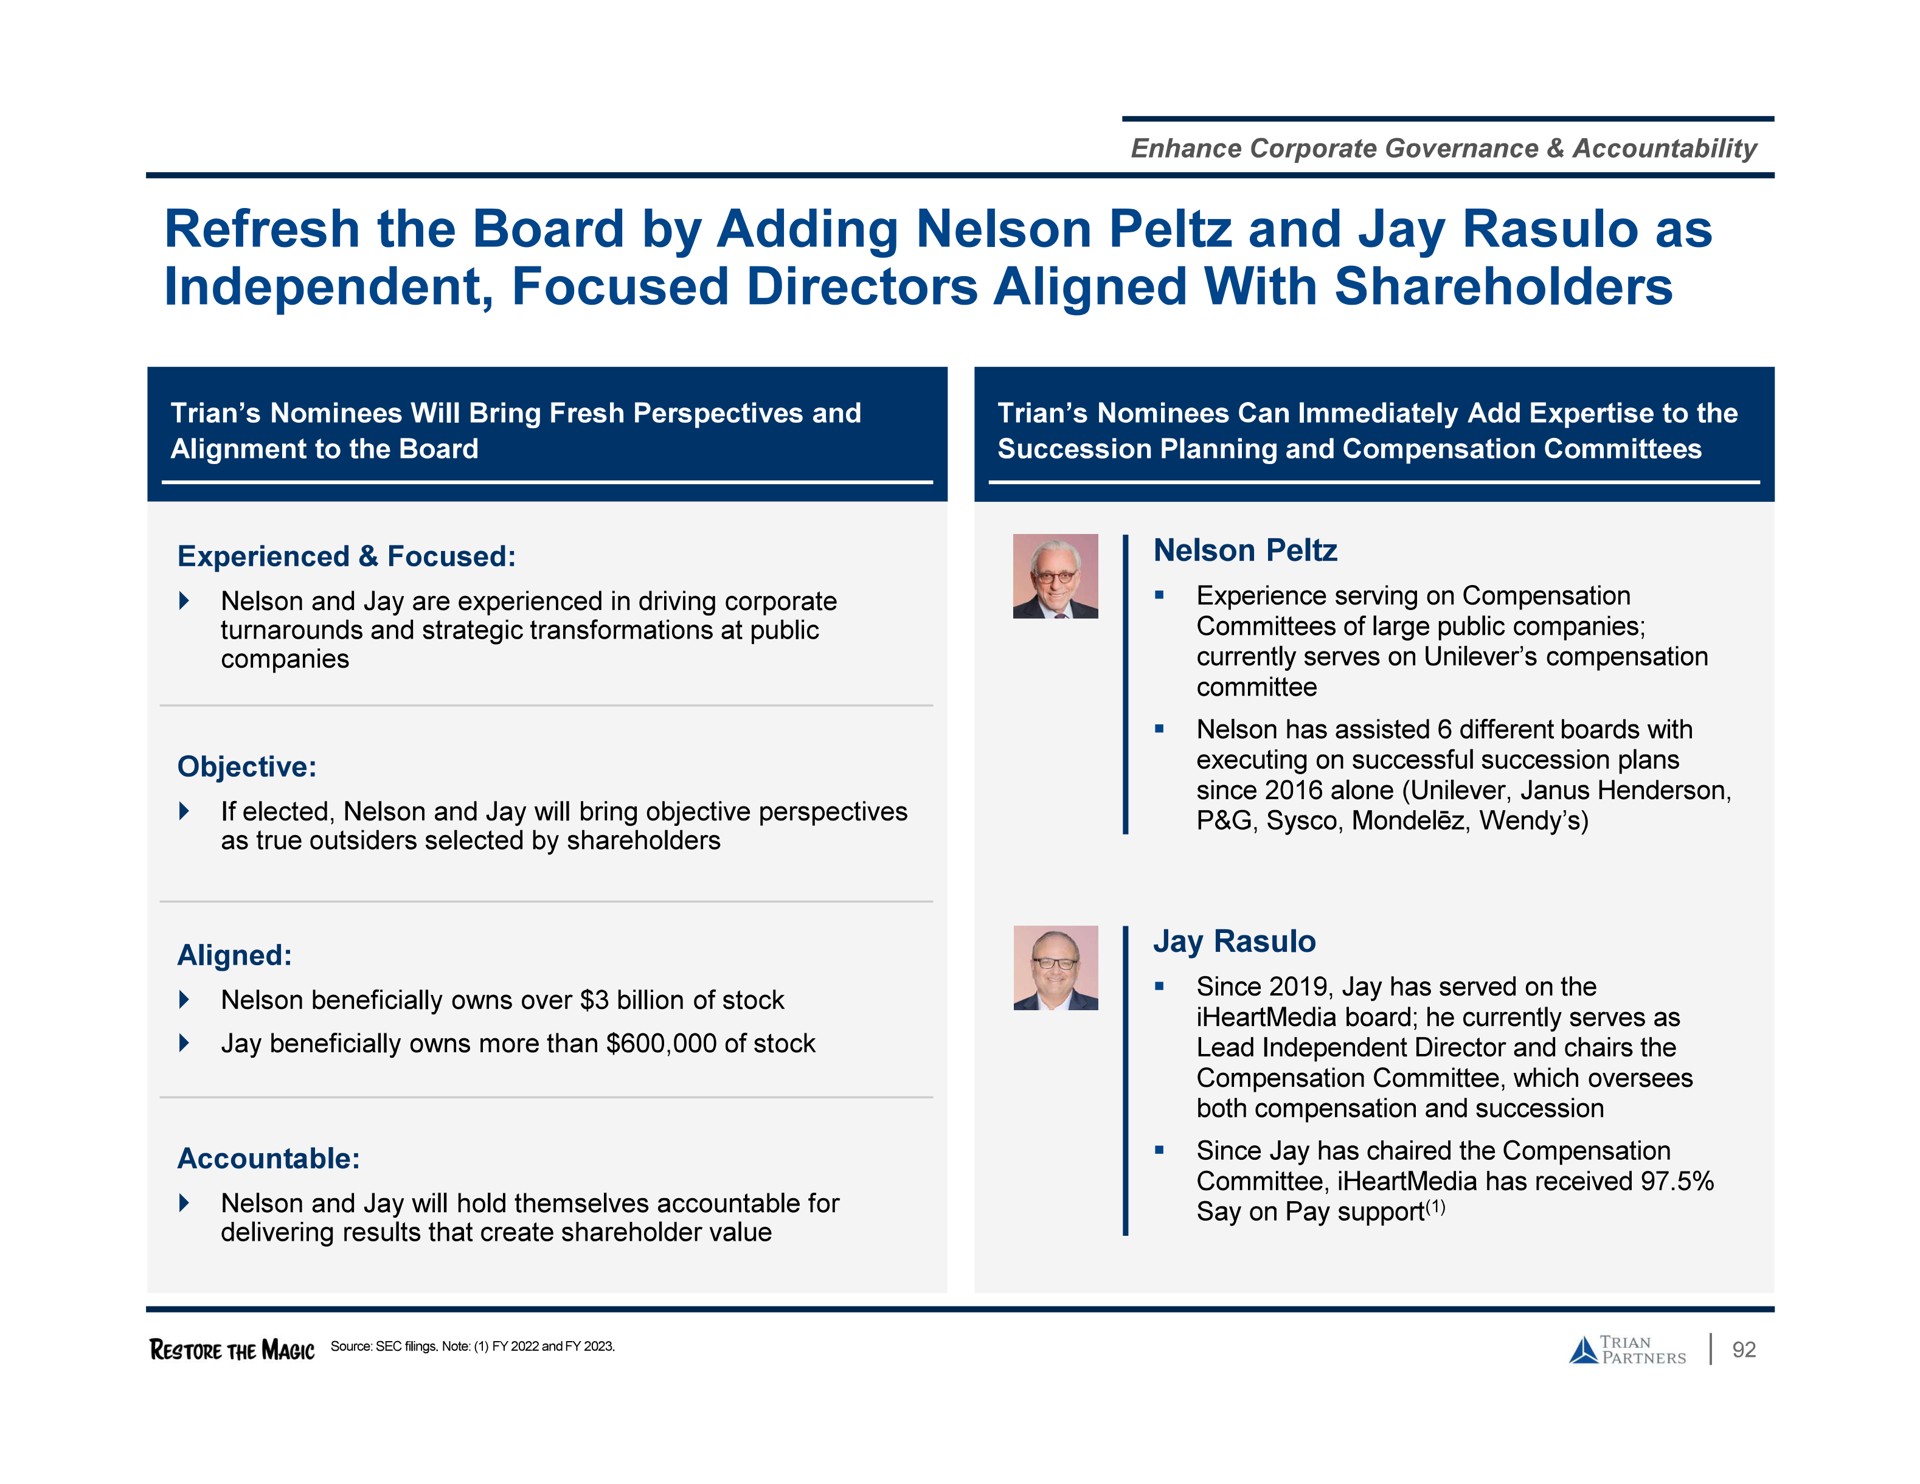 refresh the board by adding nelson and jay as independent focused directors aligned with shareholders | Trian Partners